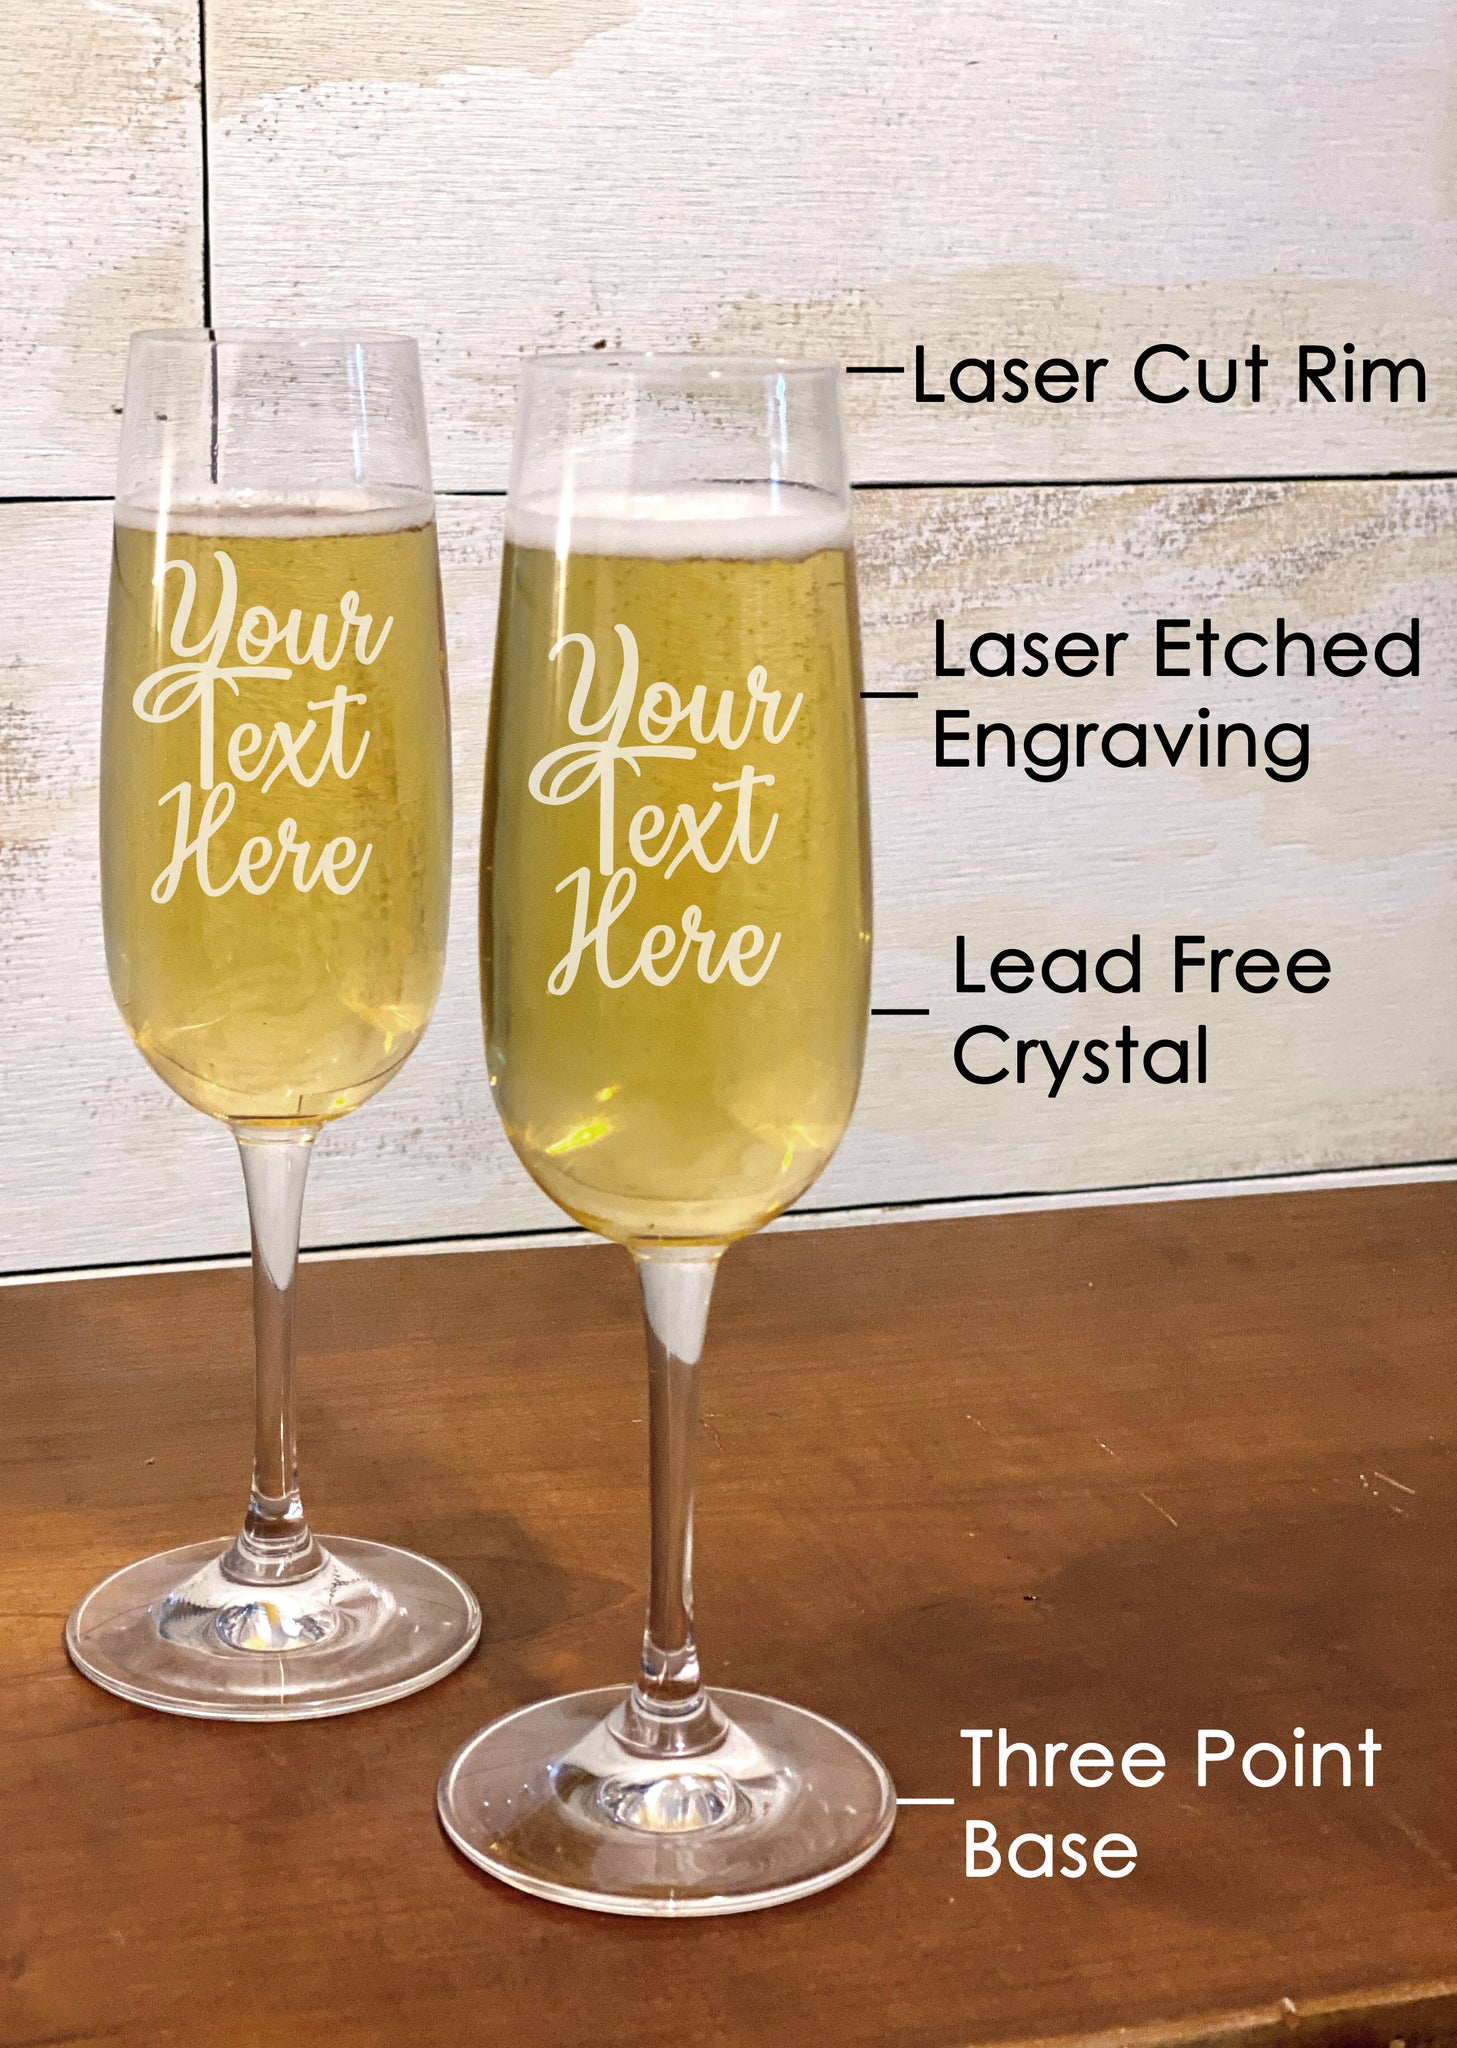 Personalized Crystal Flutes - Great Wedding Gift